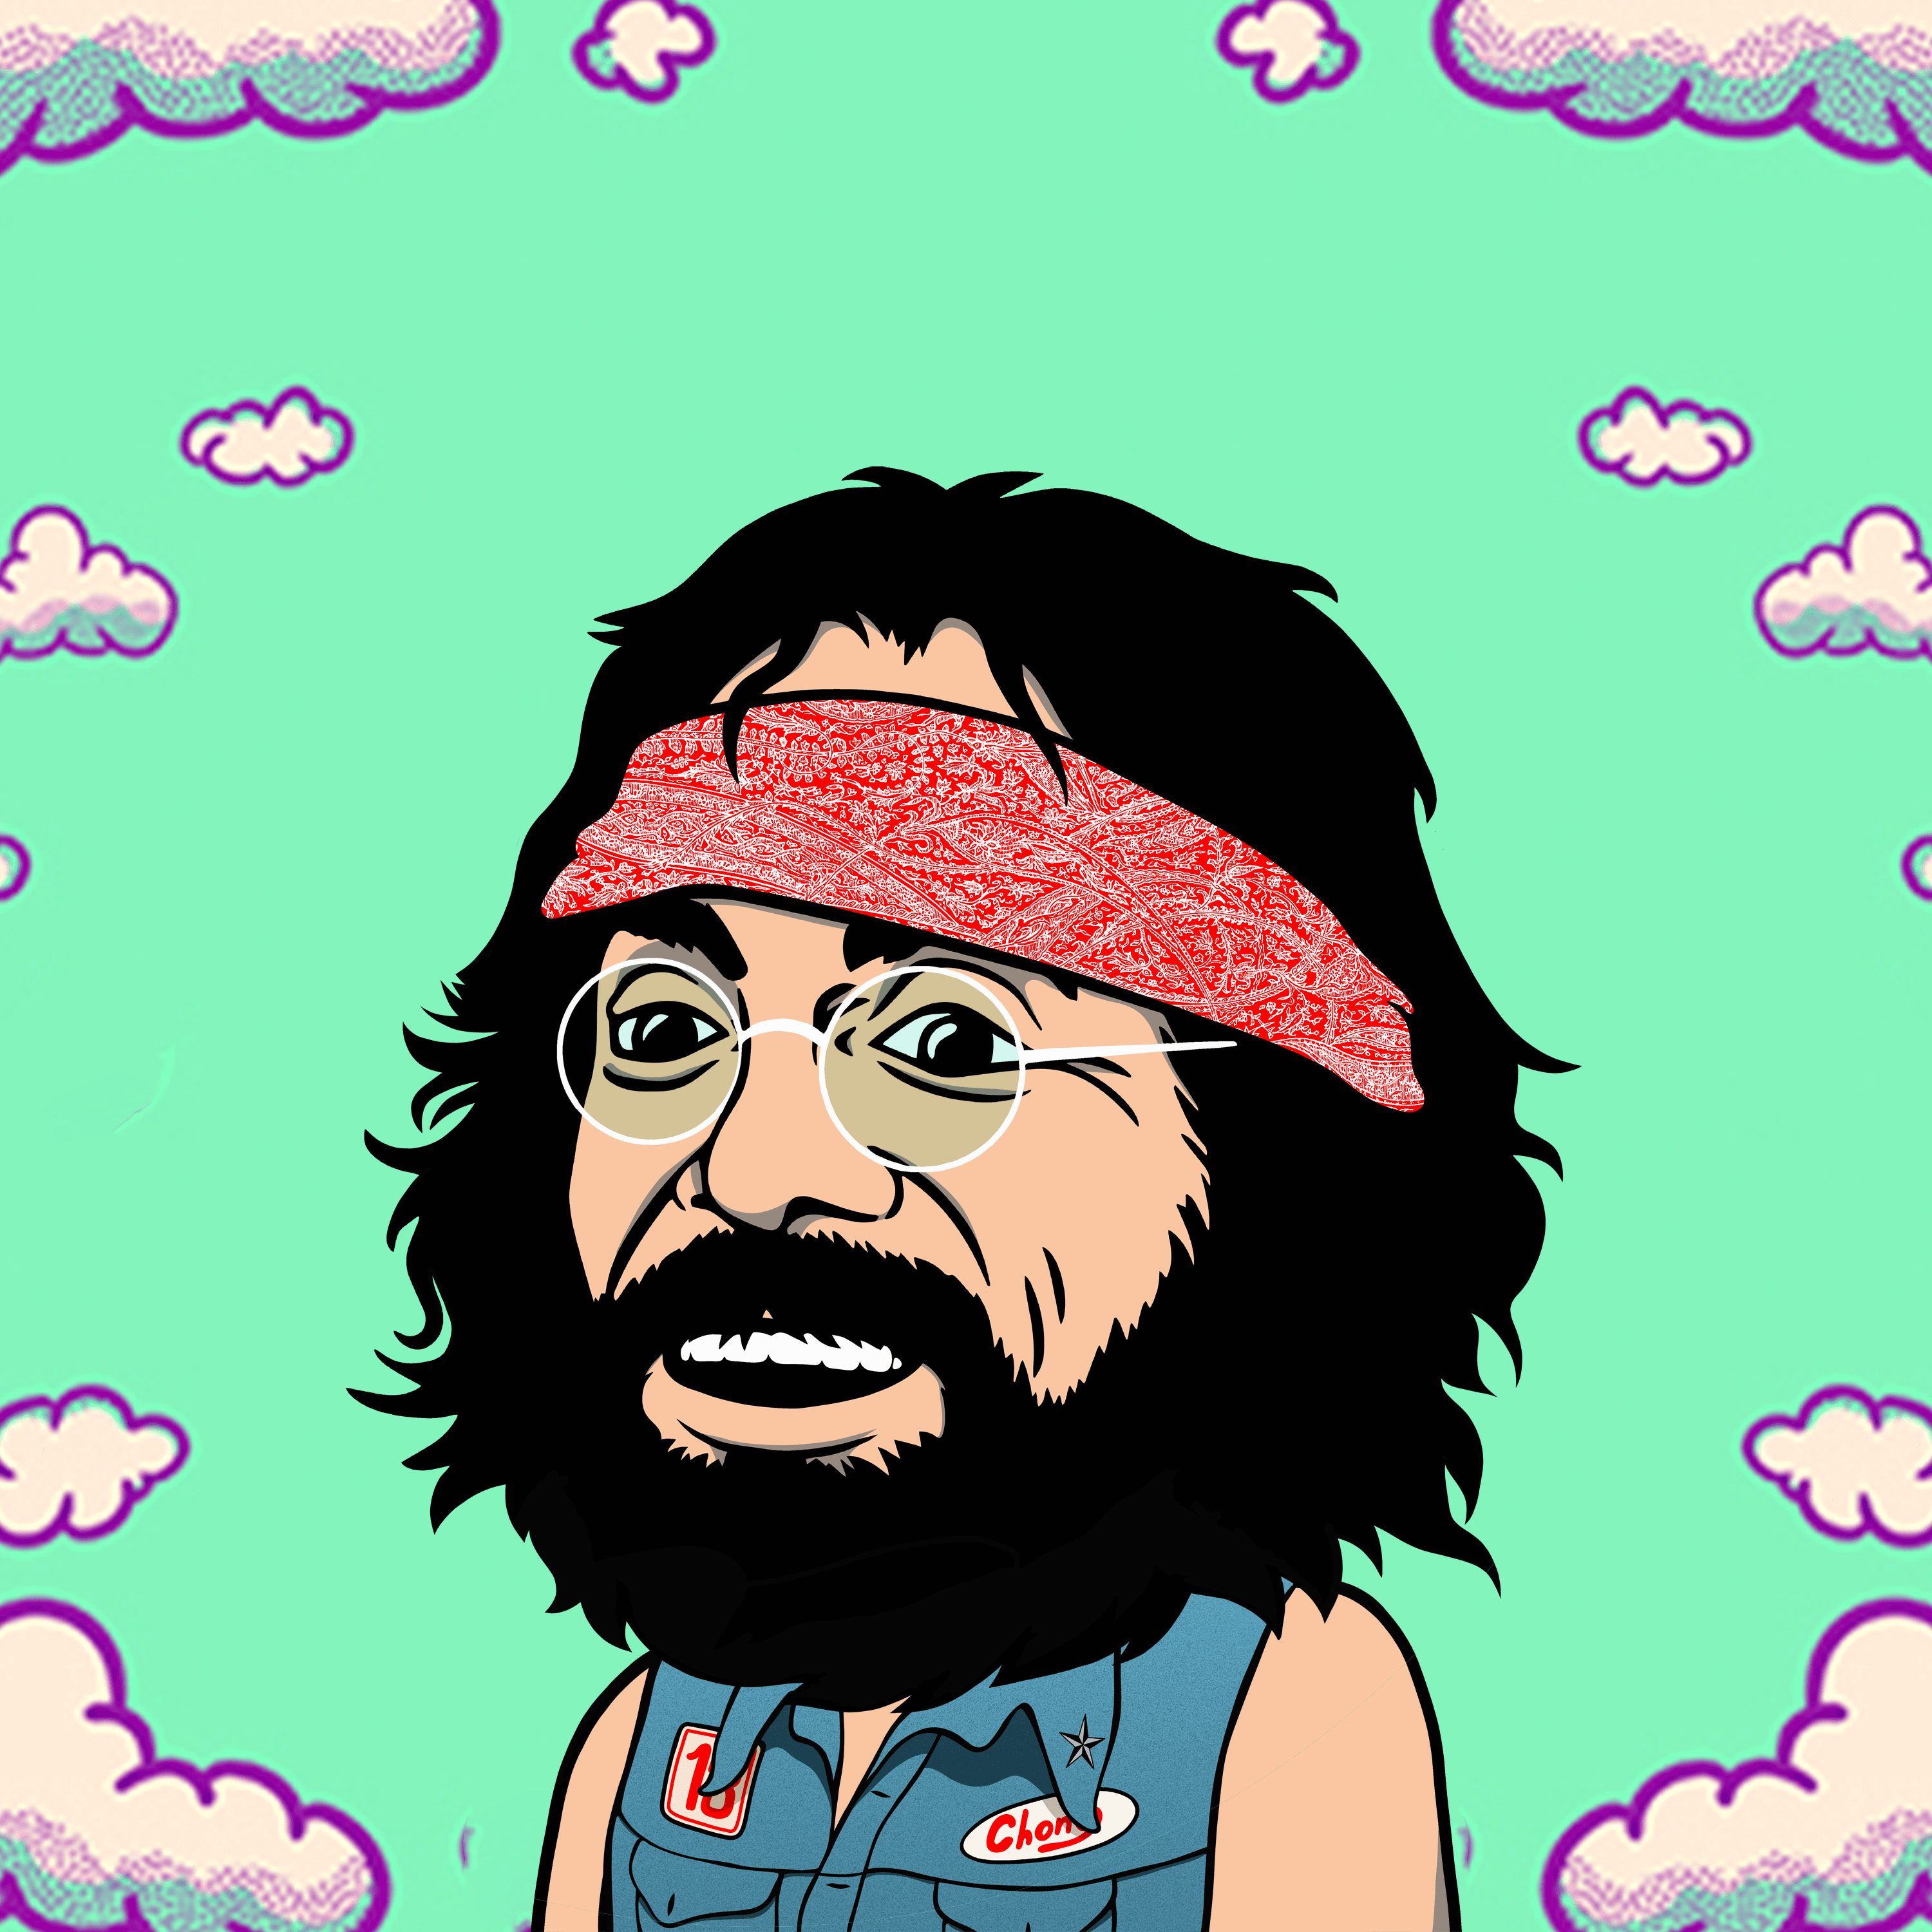 TommyKChong